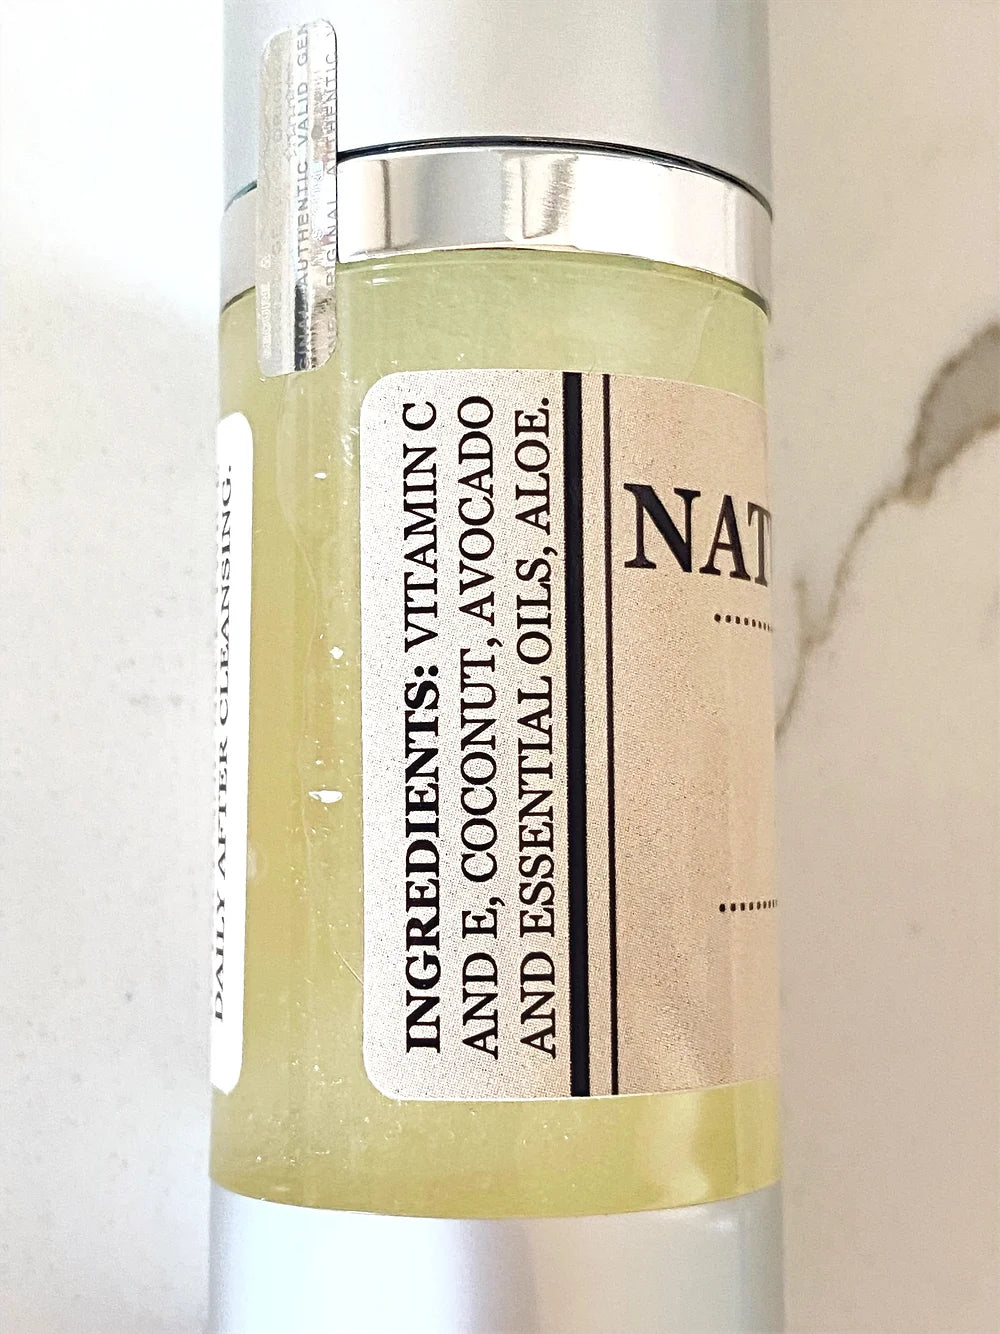 The Nature's Butter - Vitamin C Face Serum